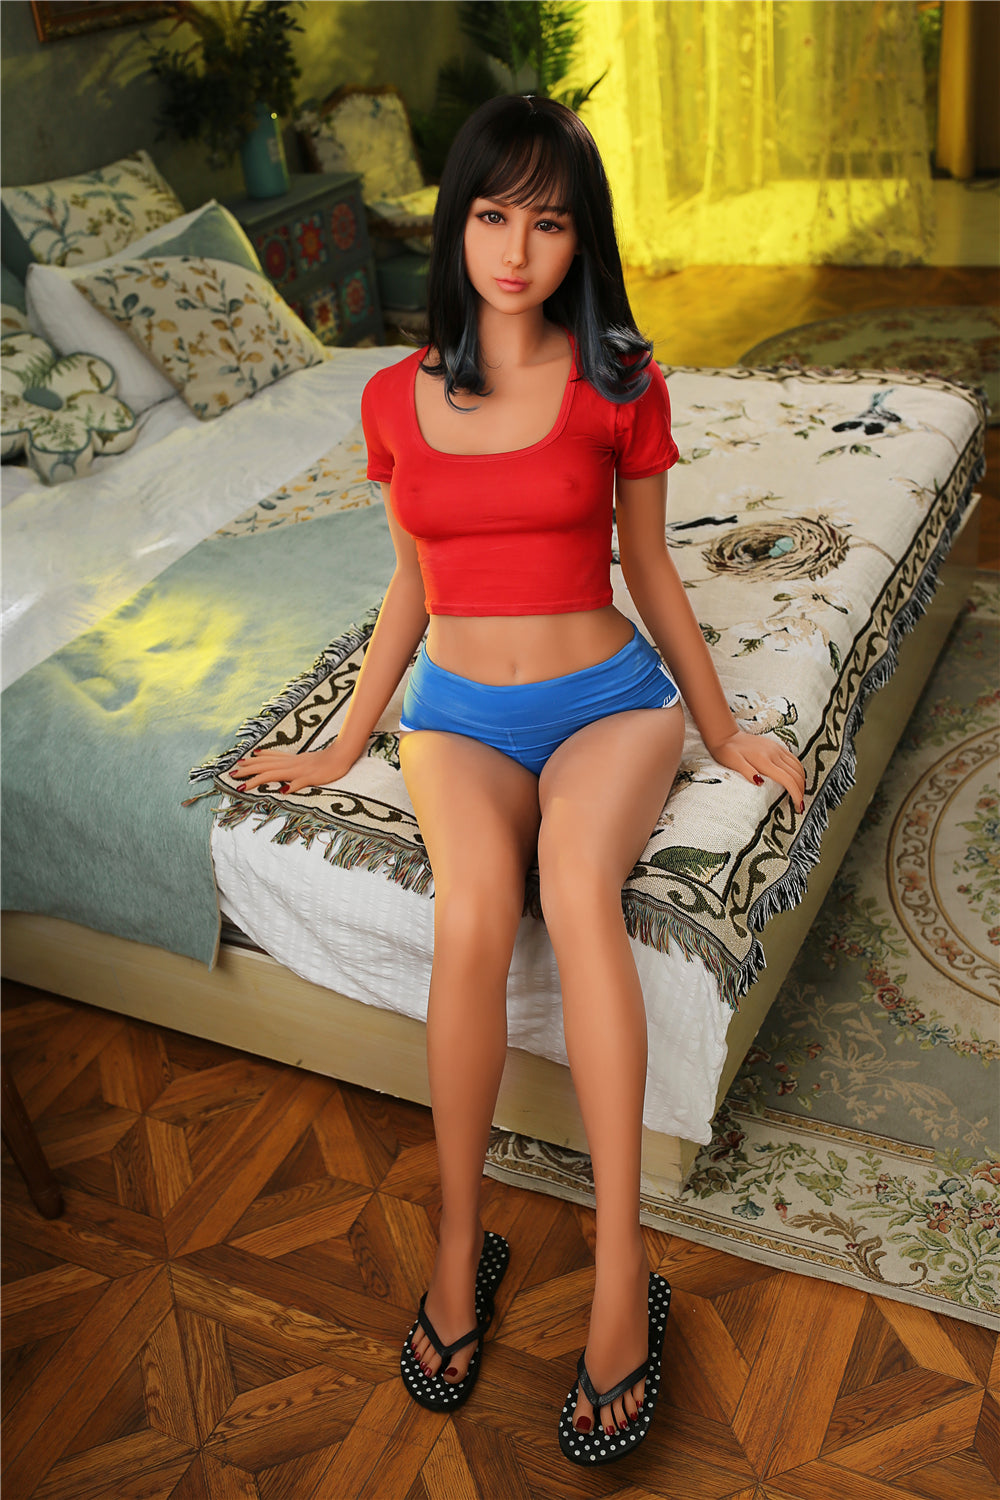 Irontech Doll 168 cm C TPE - Maisie | Buy Sex Dolls at DOLLS ACTUALLY